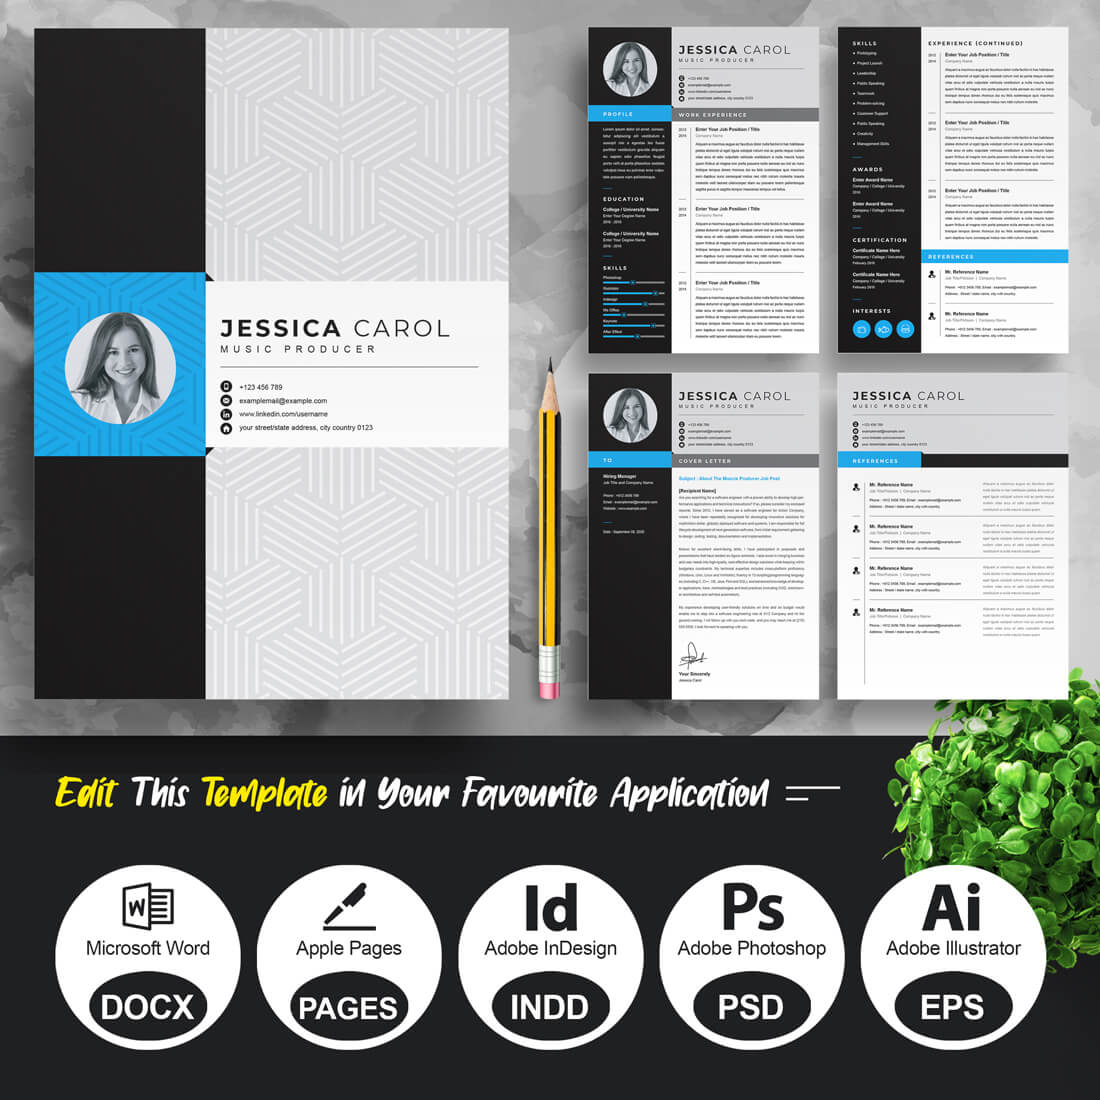 Music Producer Resume Template | Creative Resume Design cover image.